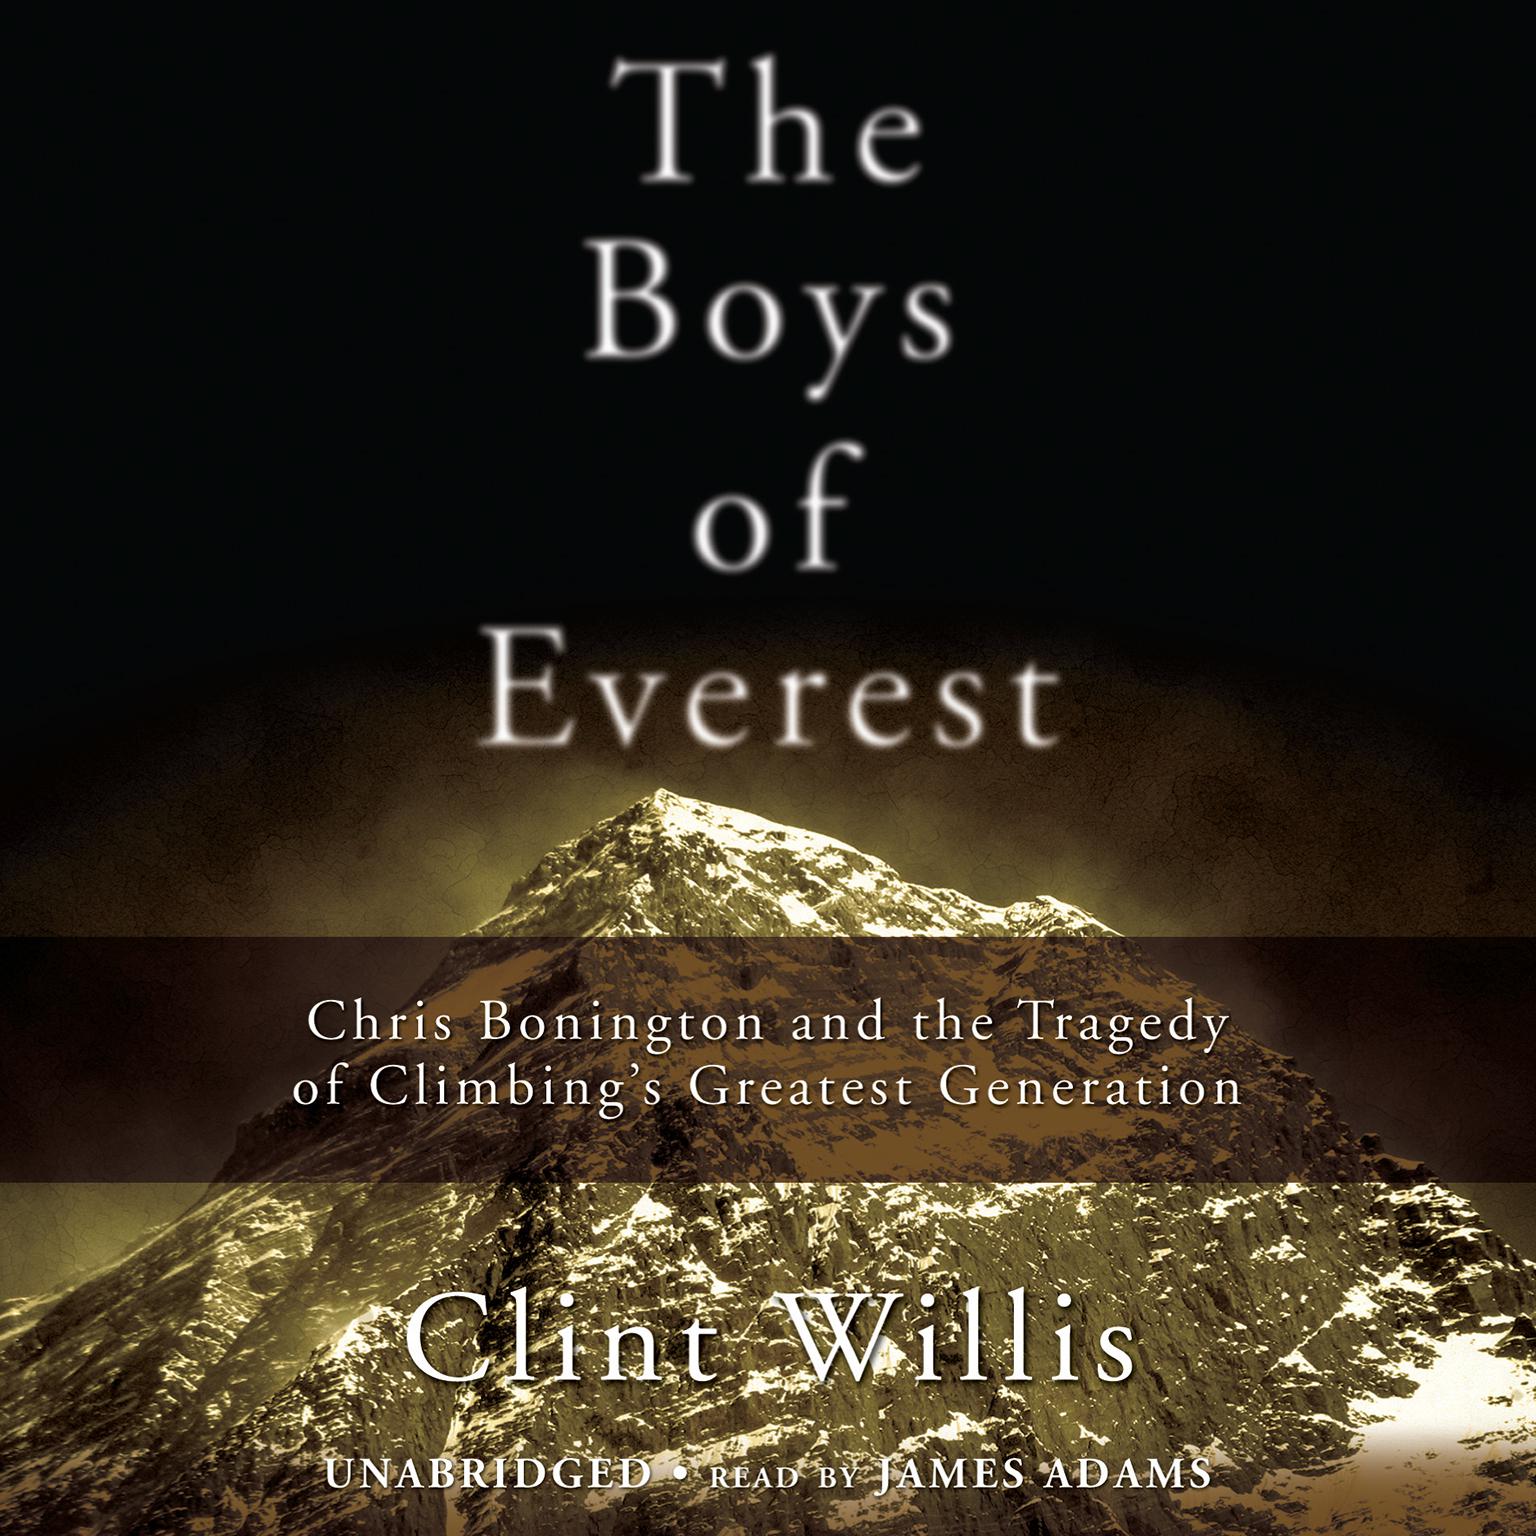 The Boys of Everest: Chris Bonington and the Tragedy of Climbing’s Greatest Generation Audiobook, by Clint Willis